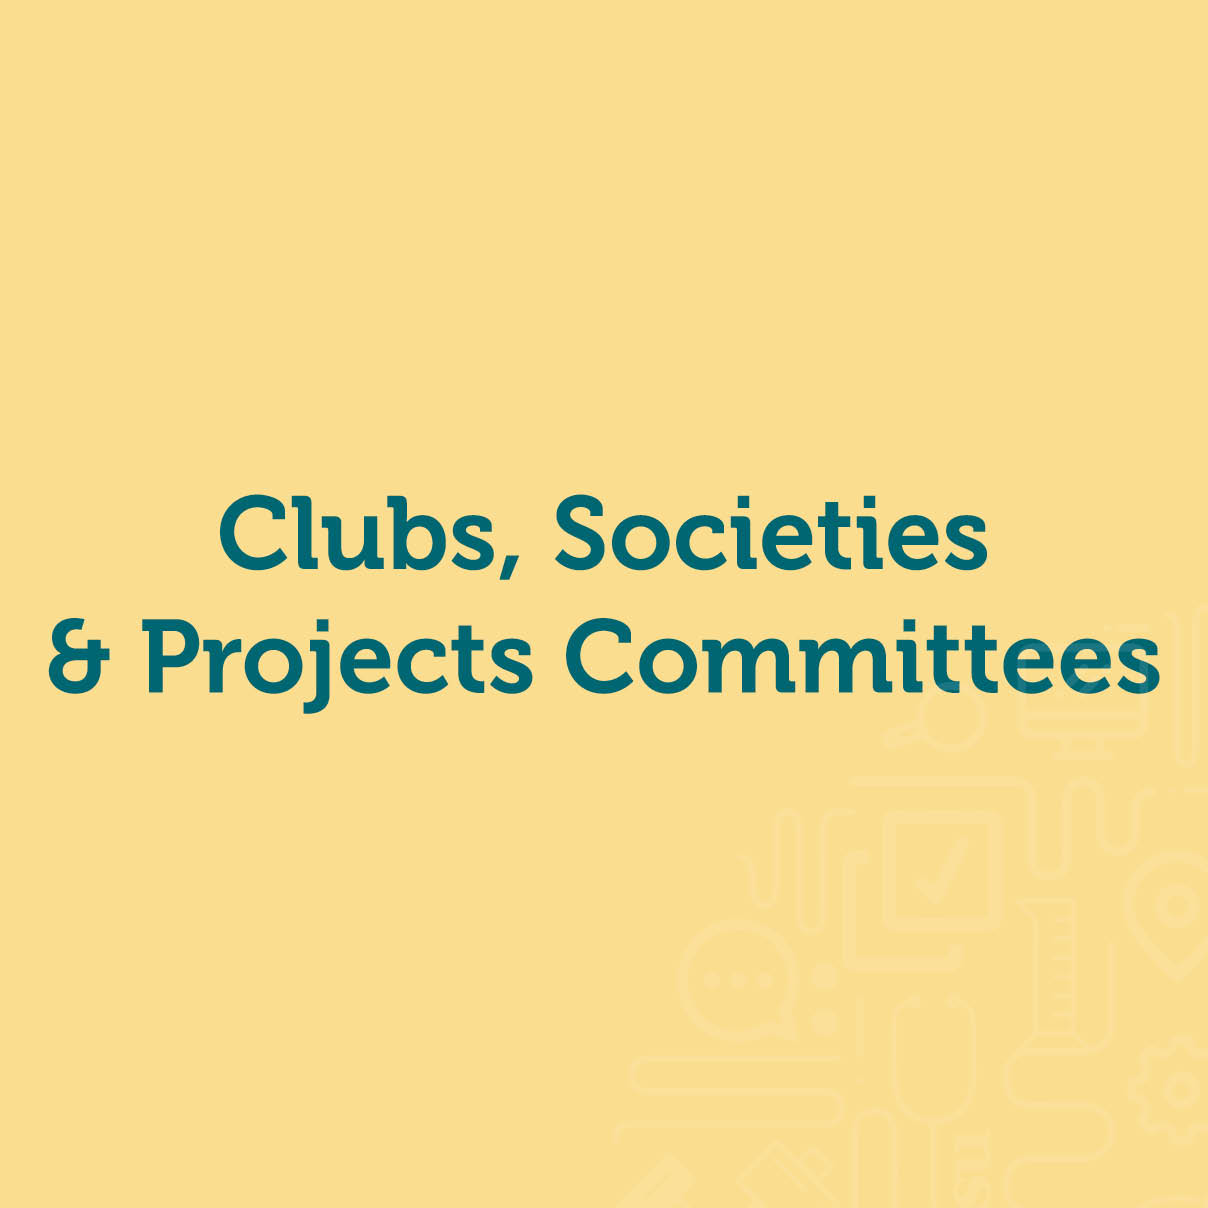 Clubs, Societies & Projects roles